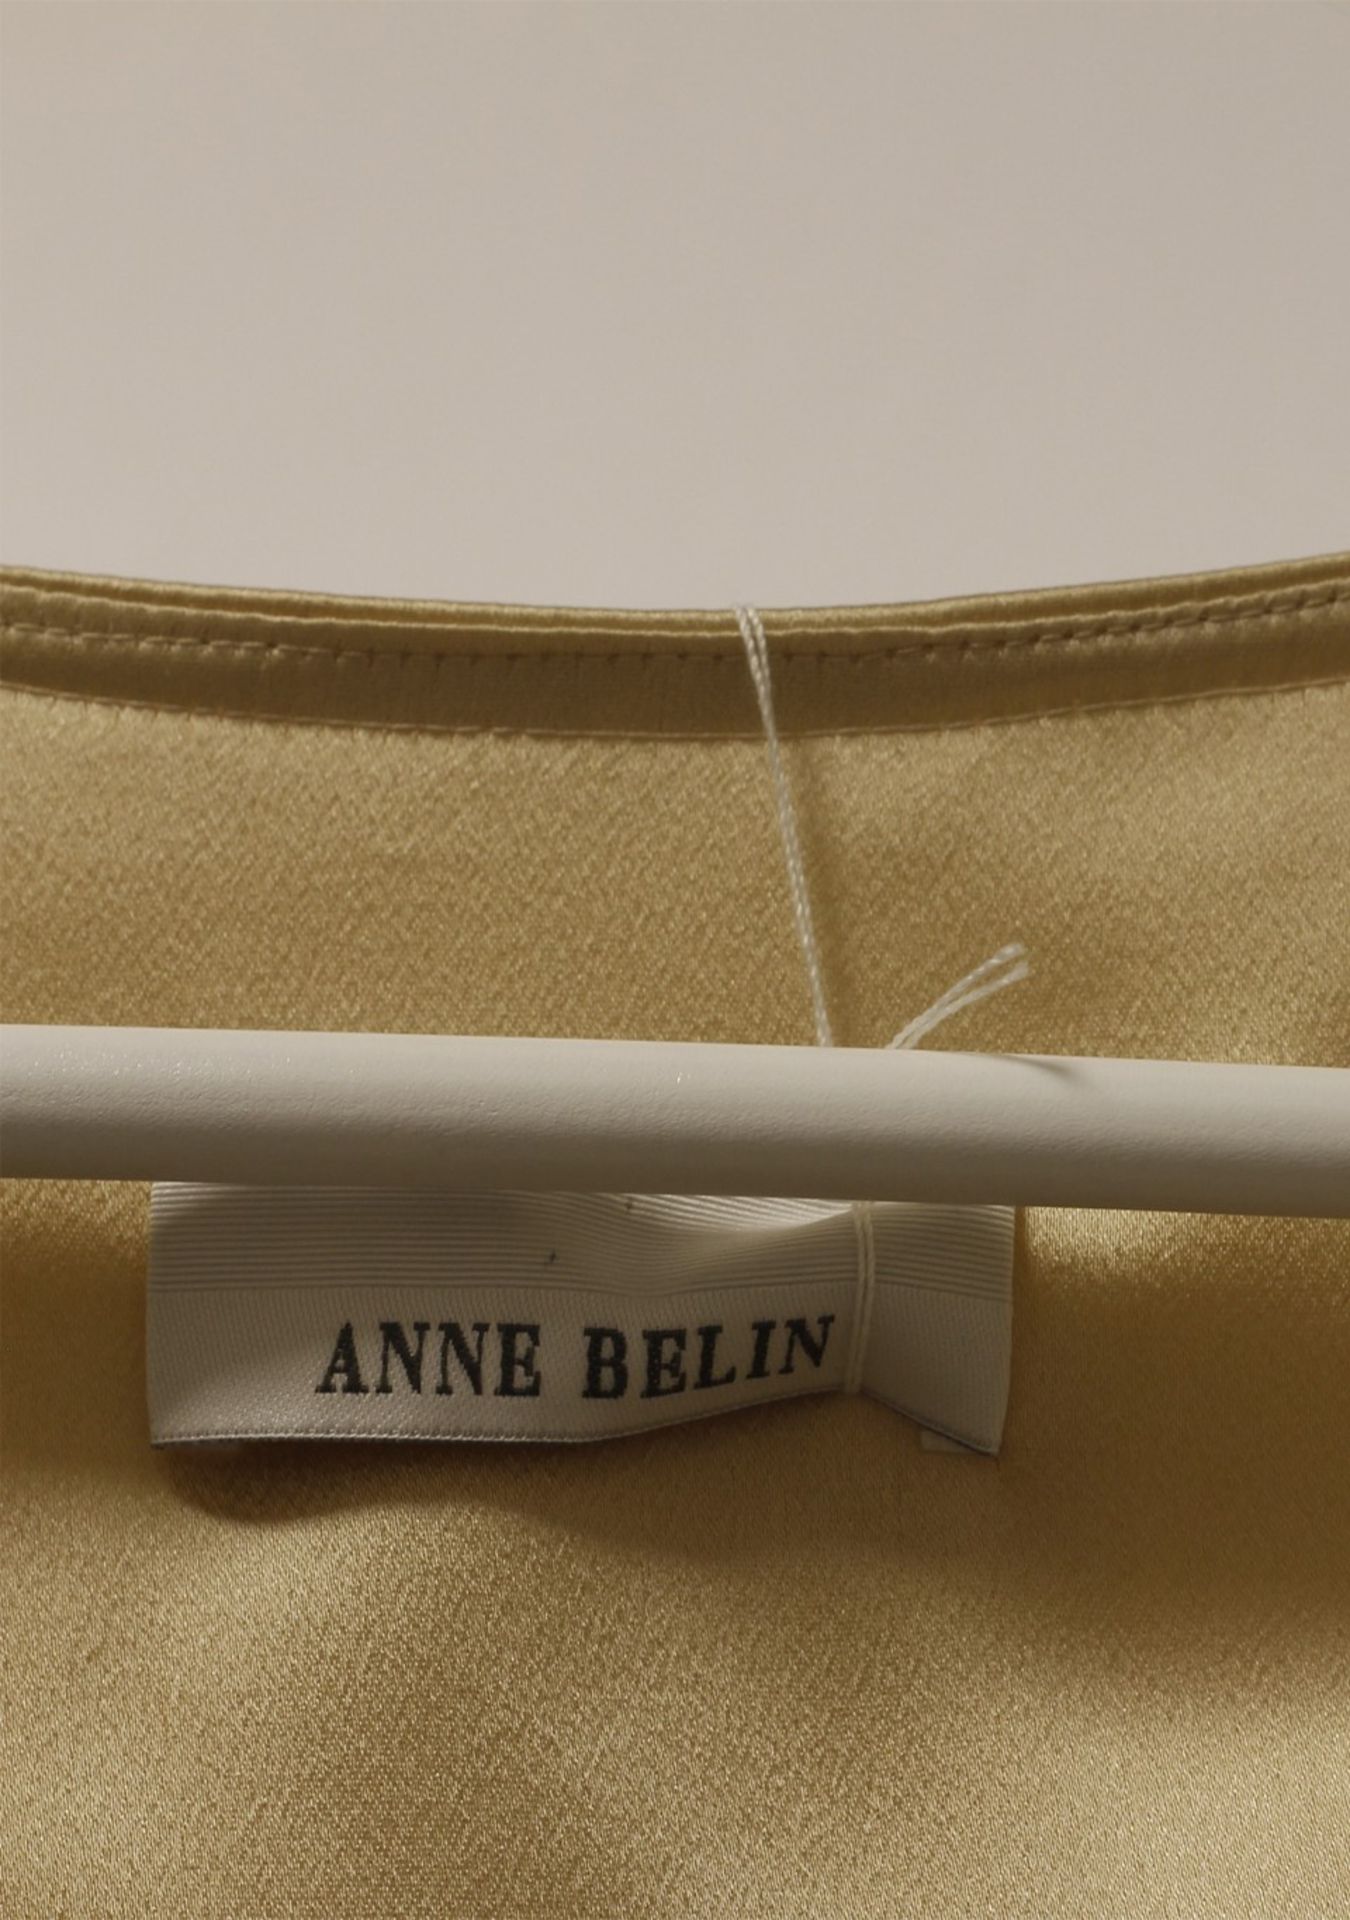 1 x Anne Belin Champagne Bolero - Size: 16 - Material: 50% Viscose, 50% Acetate - From a High End - Image 2 of 6